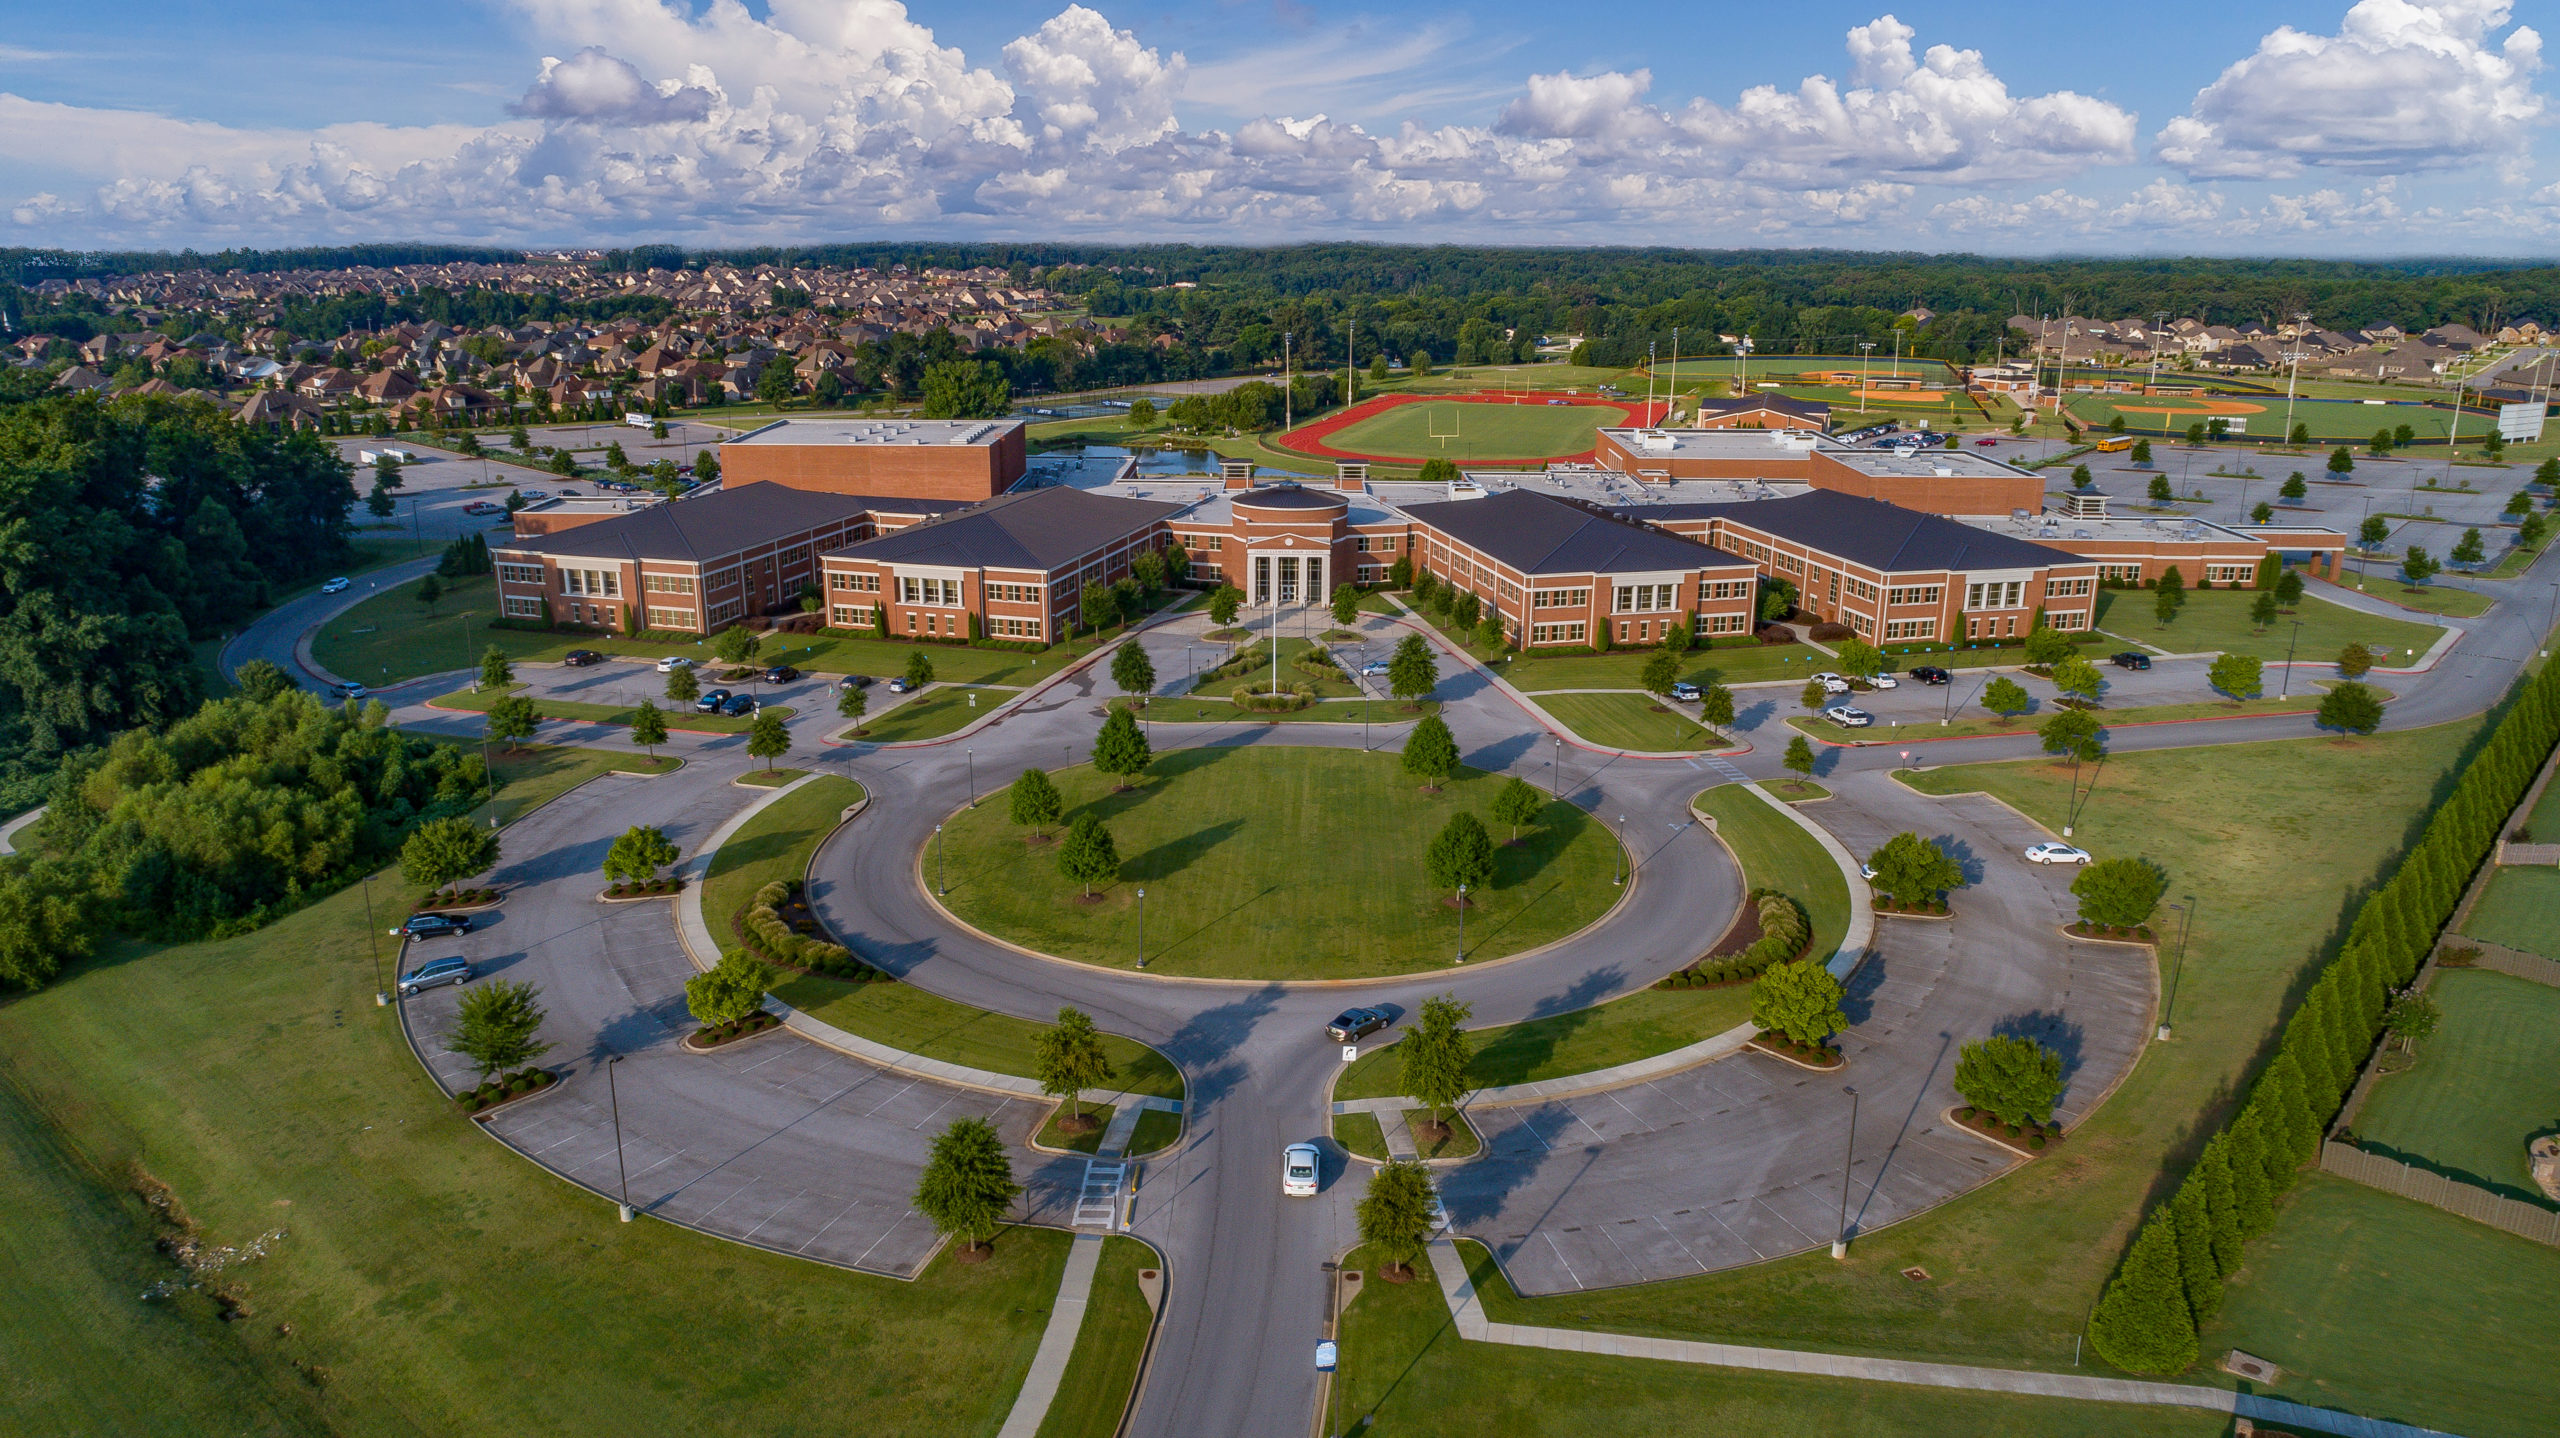 Aerial view of the entire james clemons campus including parking lot and circle drive